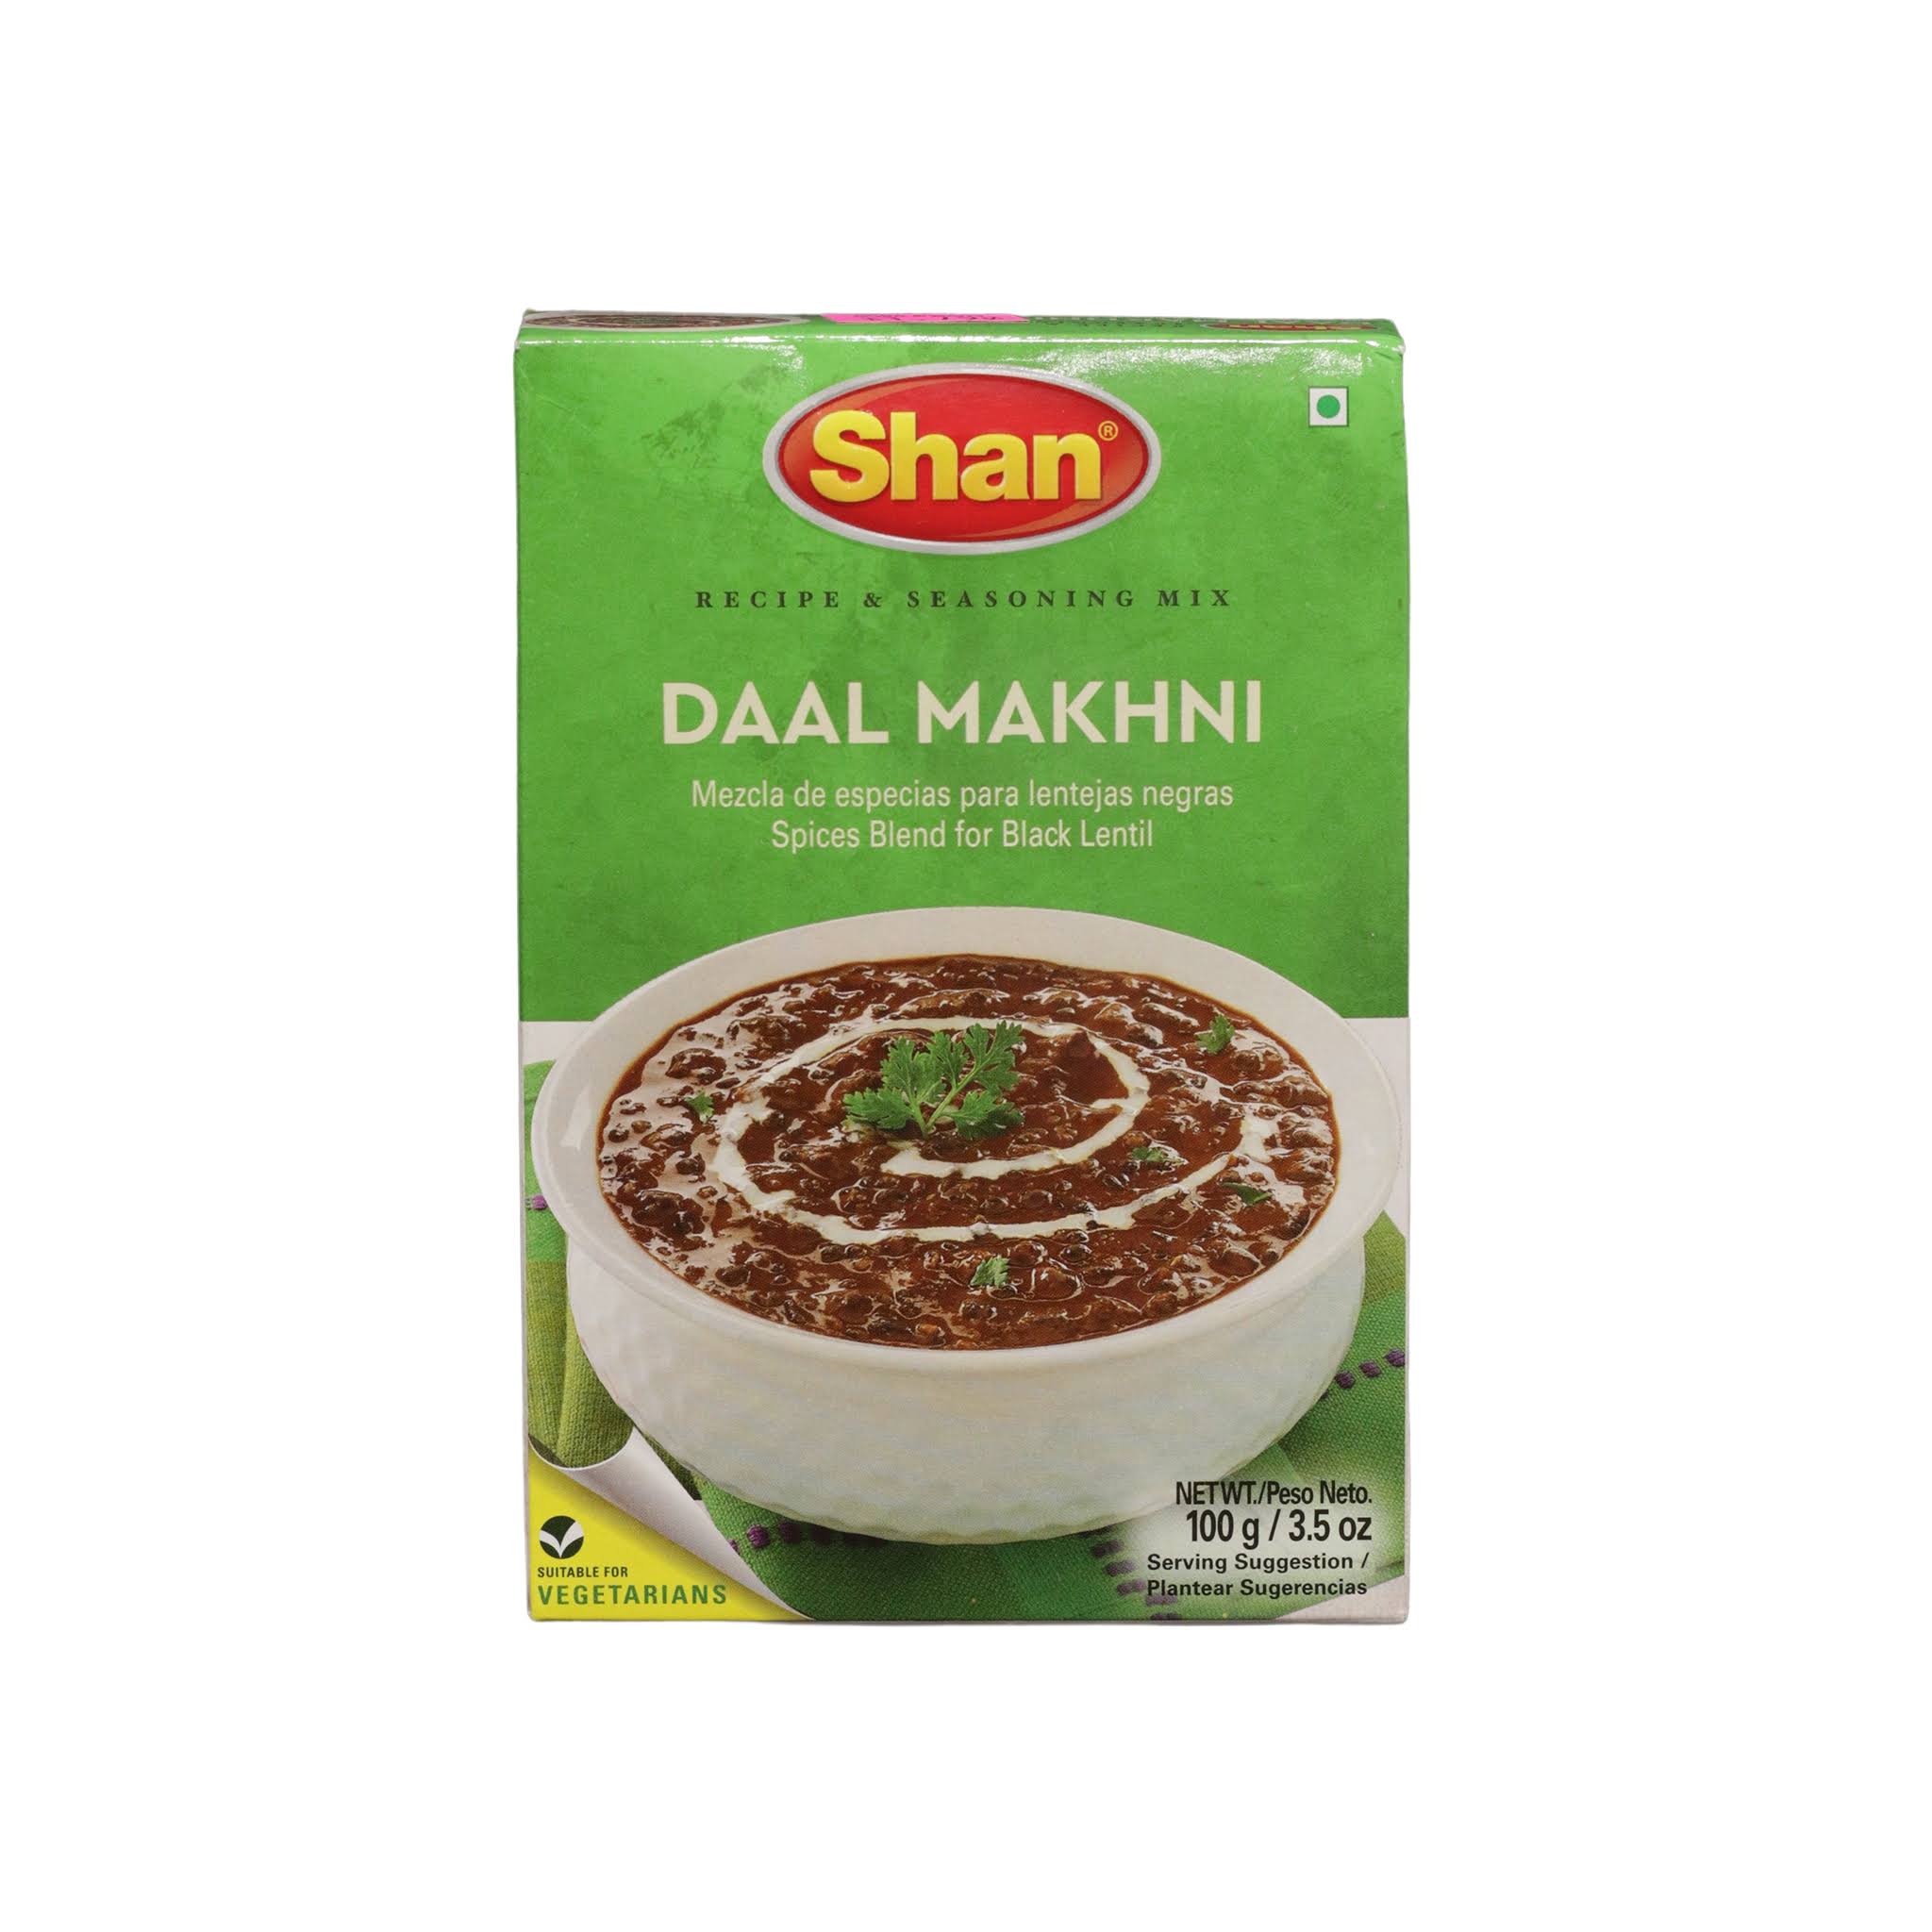 Shan Achar Gosht Recipe and Seasoning Mix 1.76 oz (50g) - Spice Powder for Meat in Pickle Condiments - Suitable for Vegetarians - Airtight Bag in a